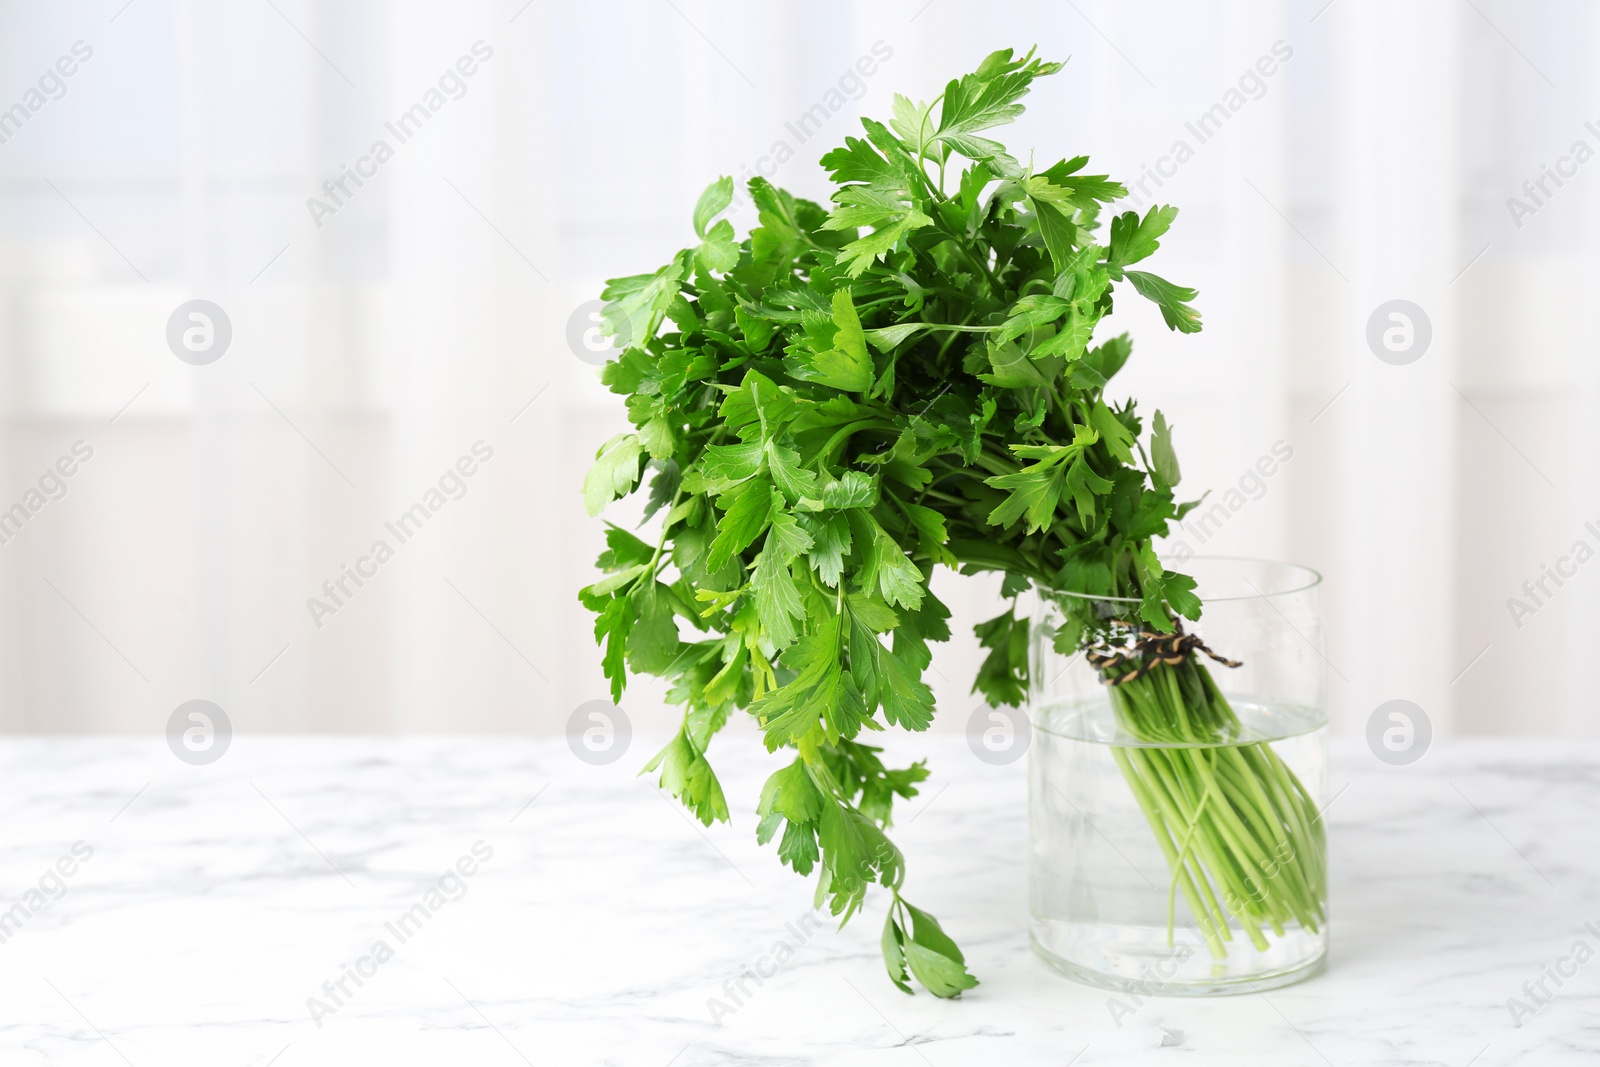 Photo of Jar with fresh green parsley on table